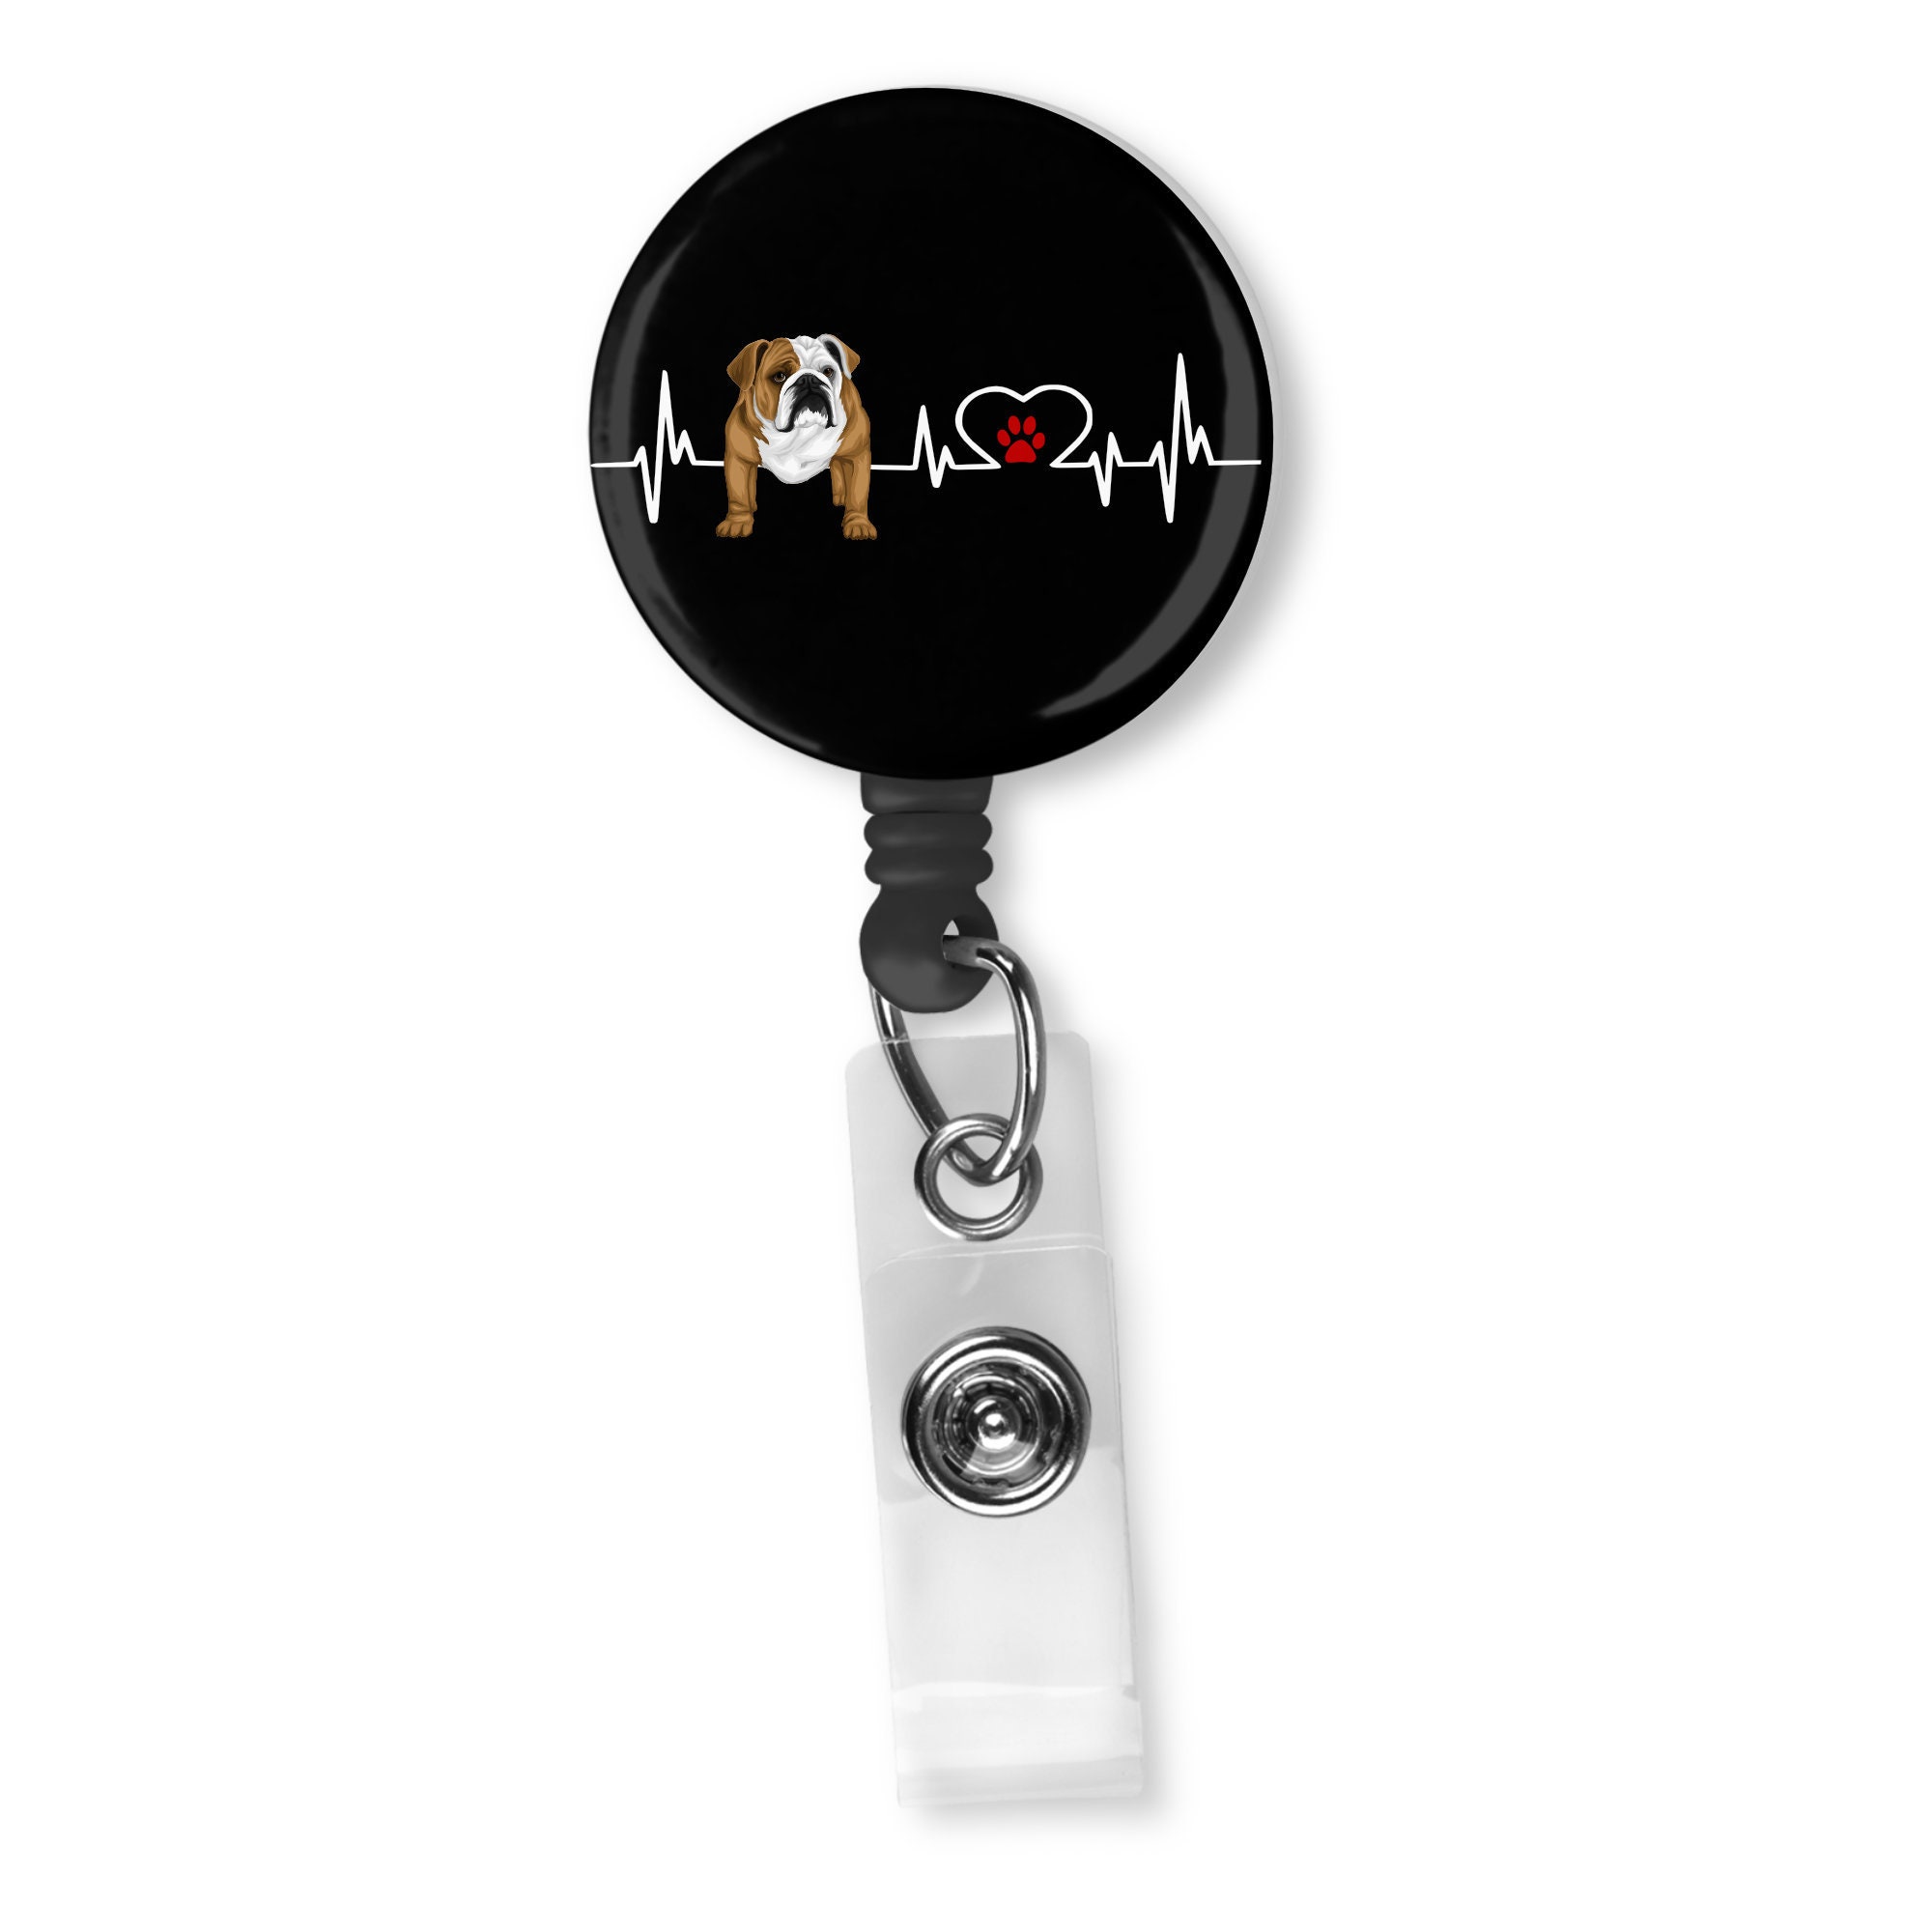 Retractable Badge Reels (Transparent, 10 Pack) w/Bulldog Clip & Snap Strap to Secure ID Name Card Holders by Mifflin